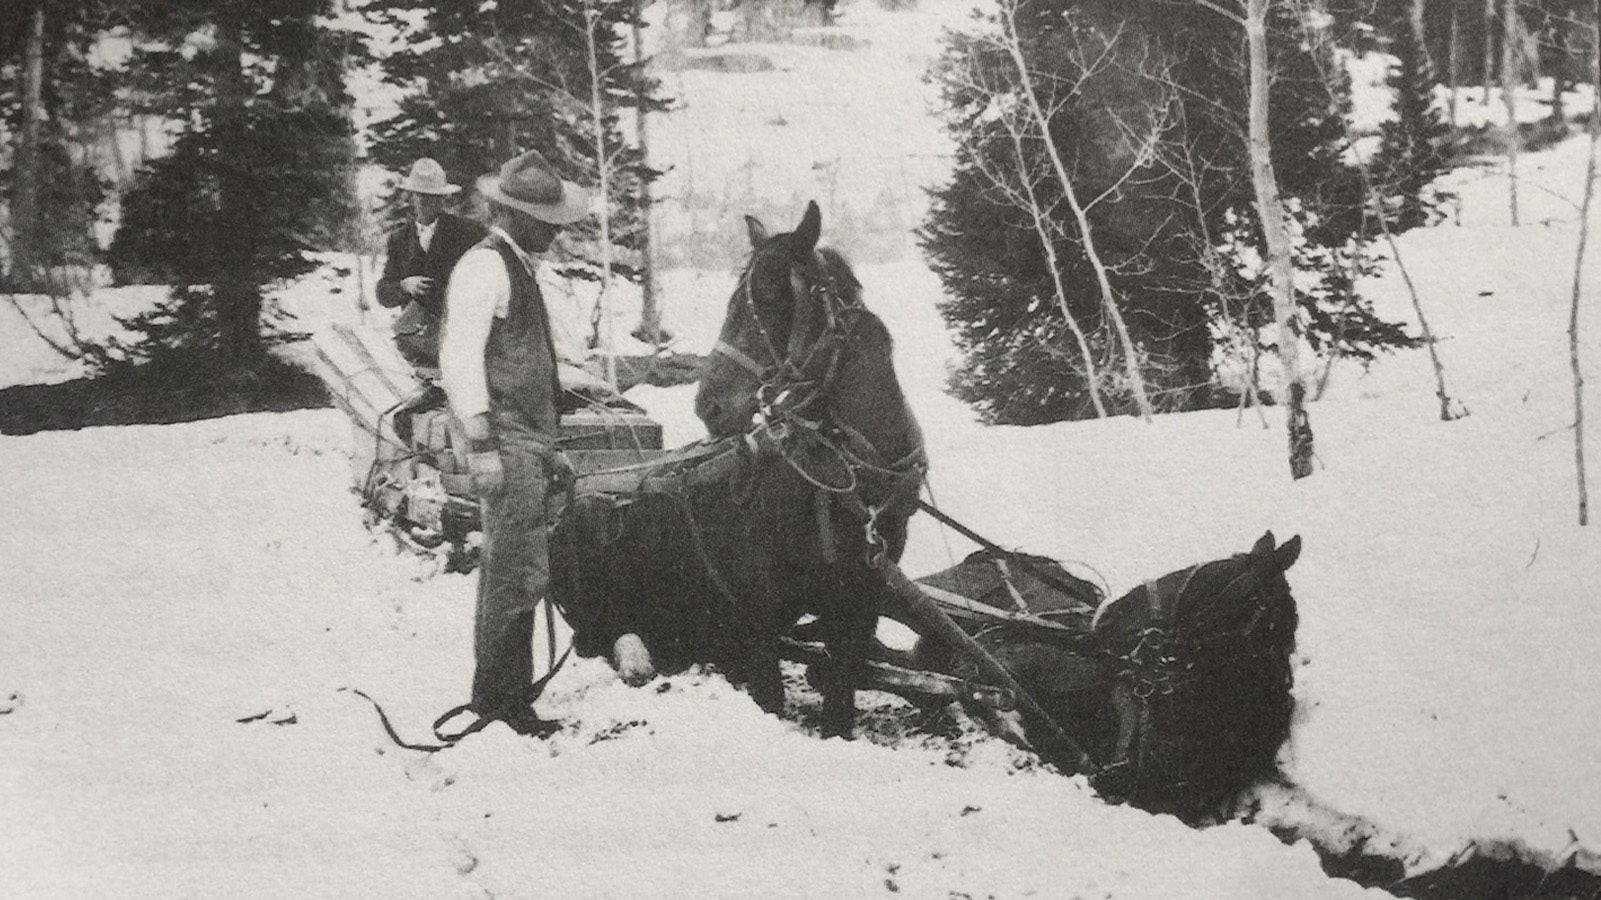 A hardy mail carrier and his team get stuck in soft snow over Teton Pass in May 1912.